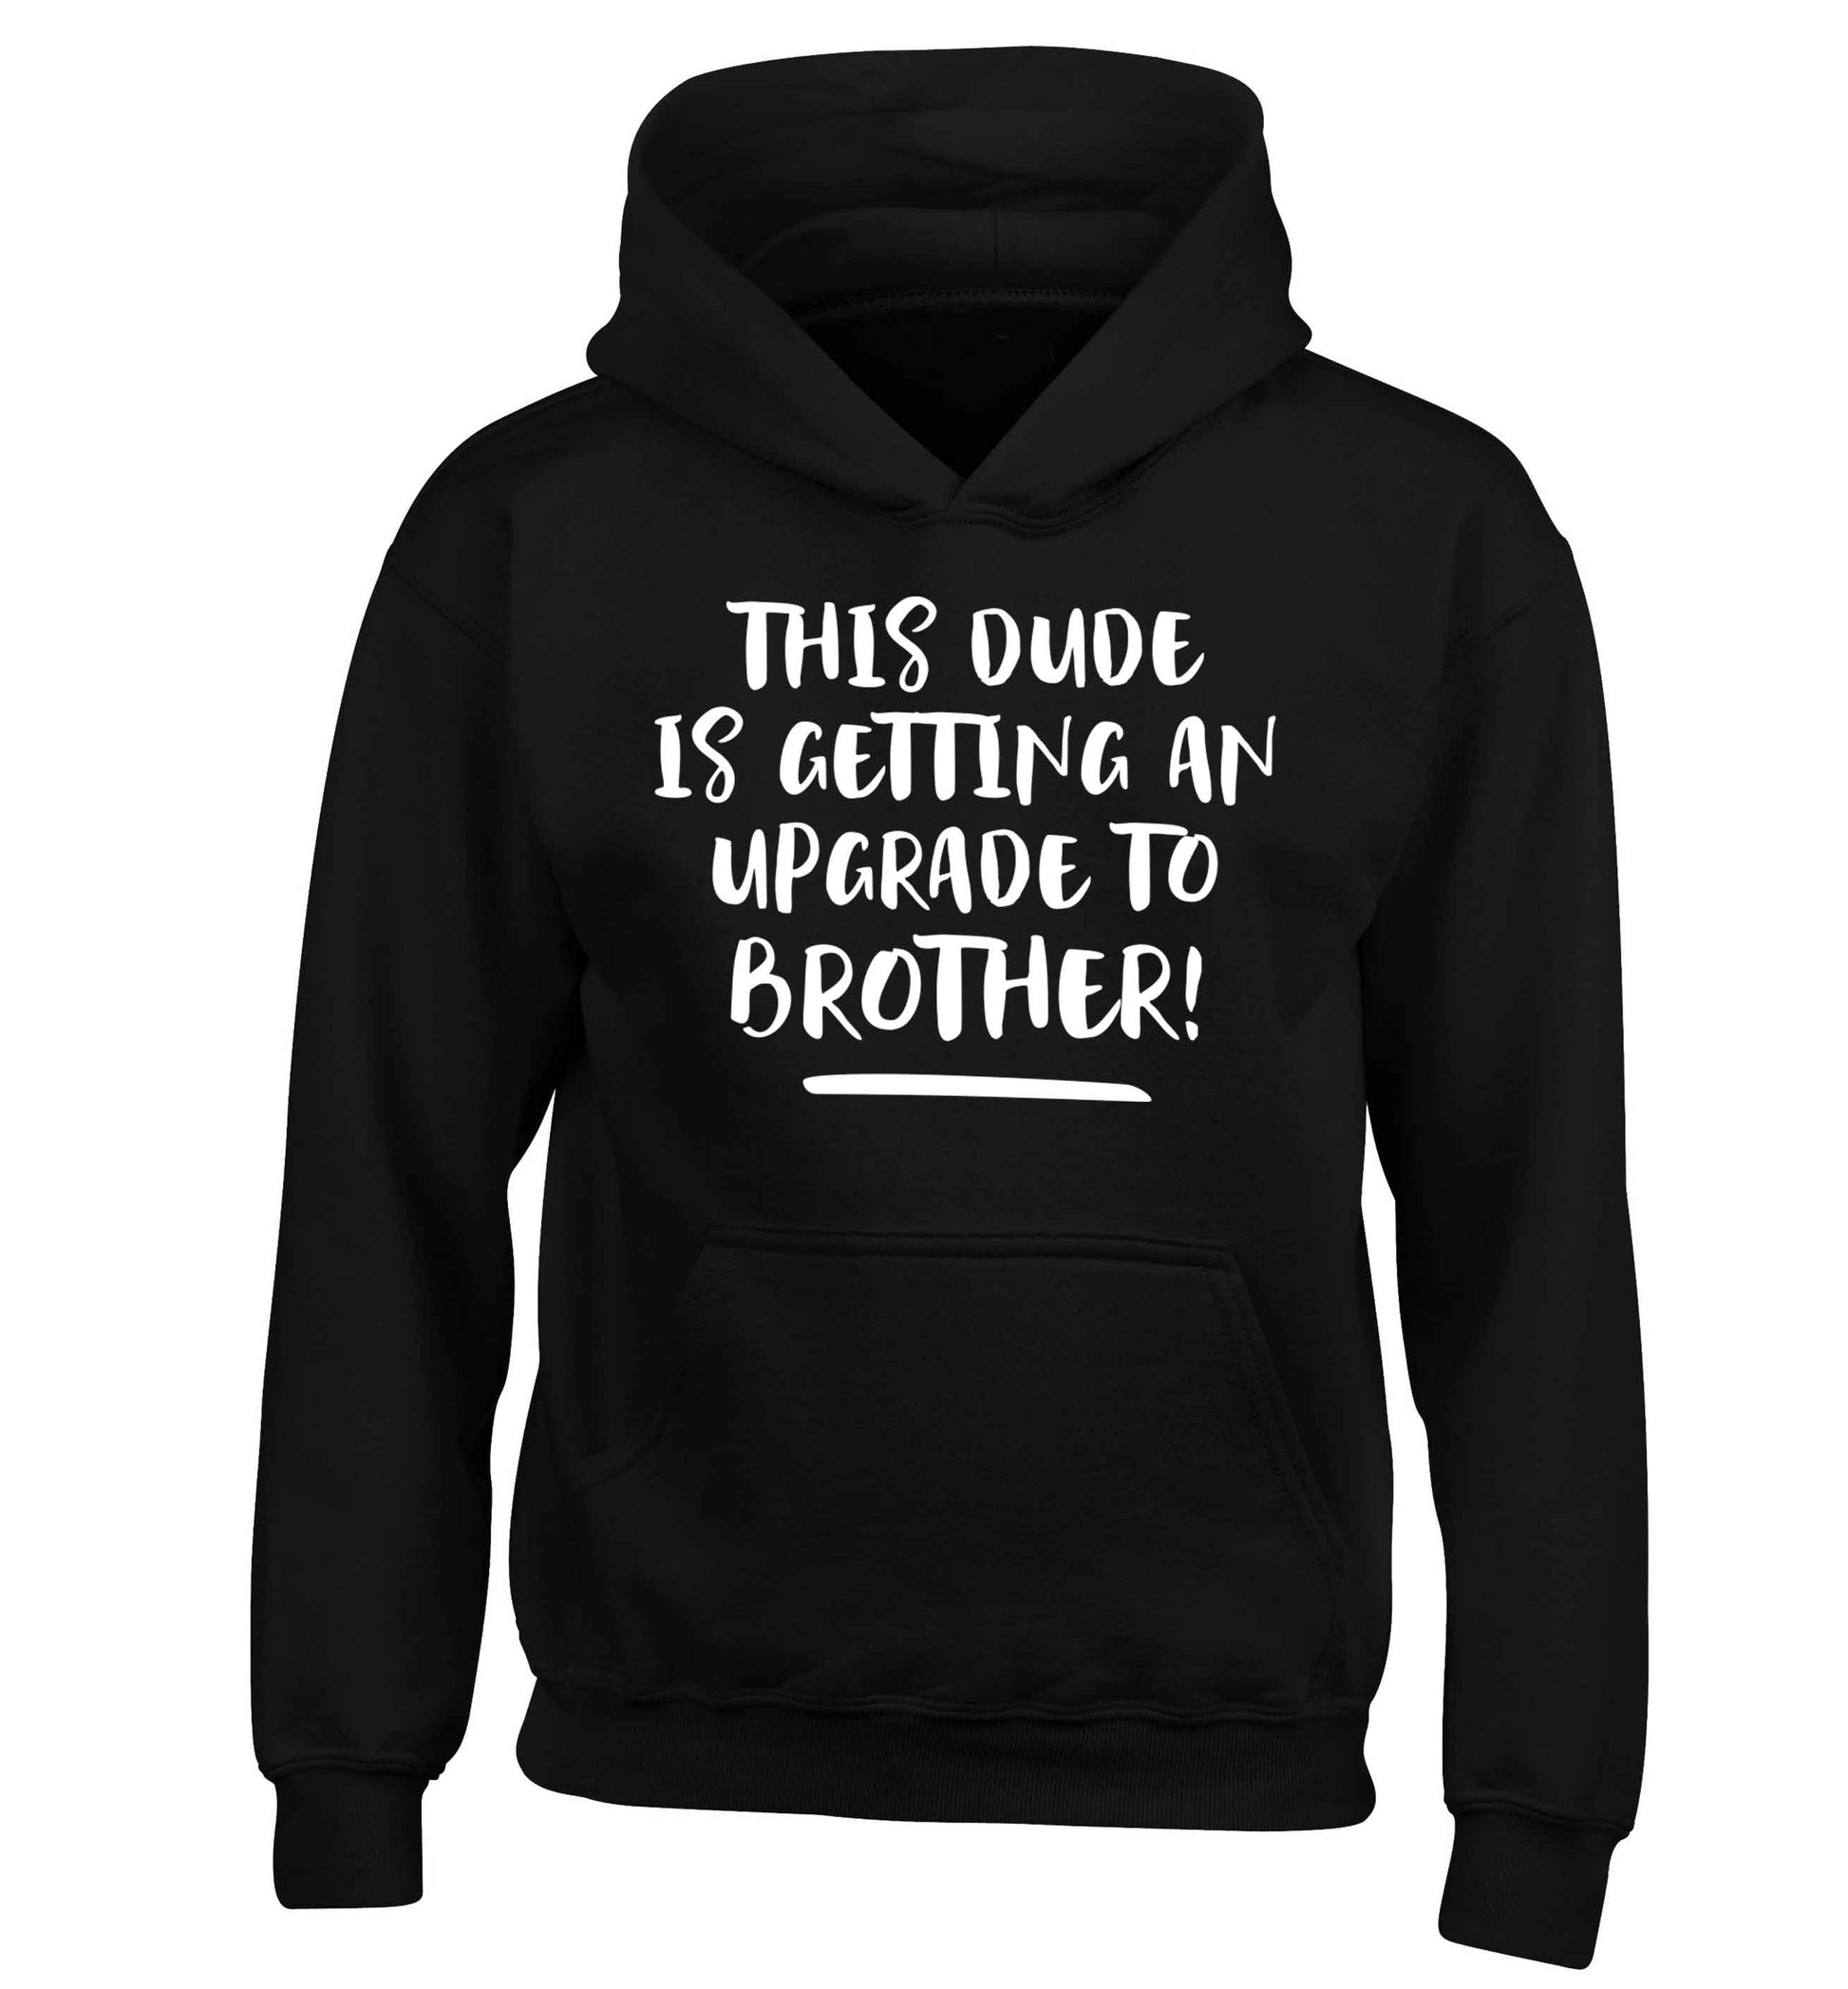 This dude is getting an upgrade to brother! children's black hoodie 12-13 Years